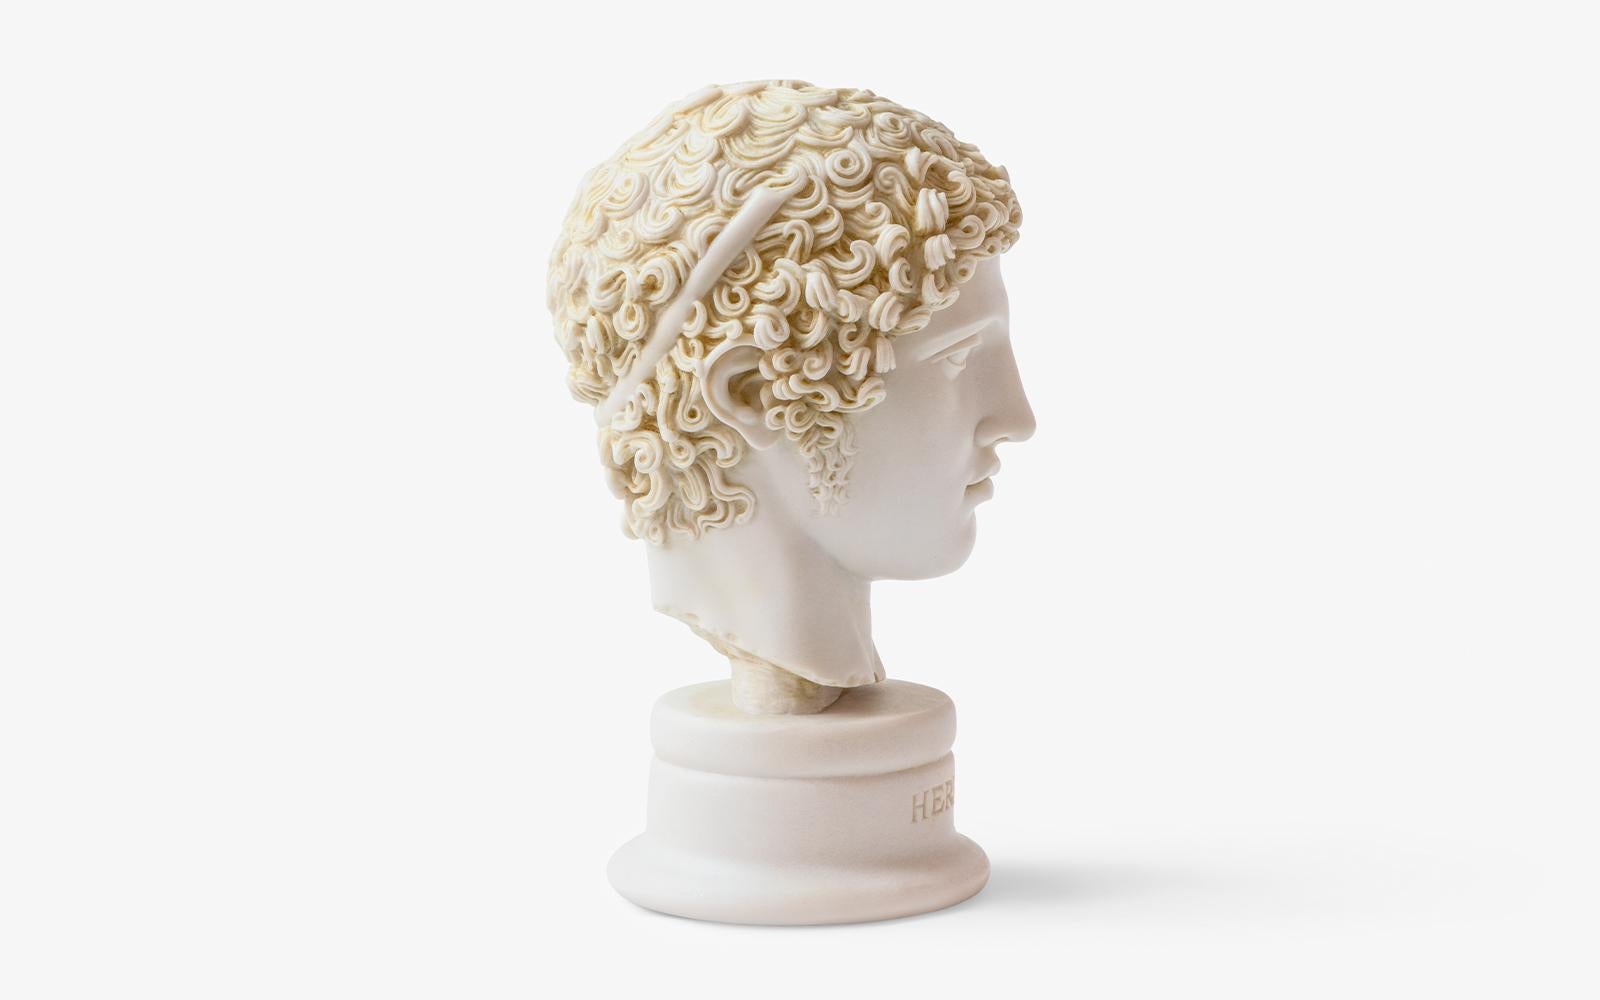 Turkish Hermes Bust Made with Compressed Marble Powder, Large